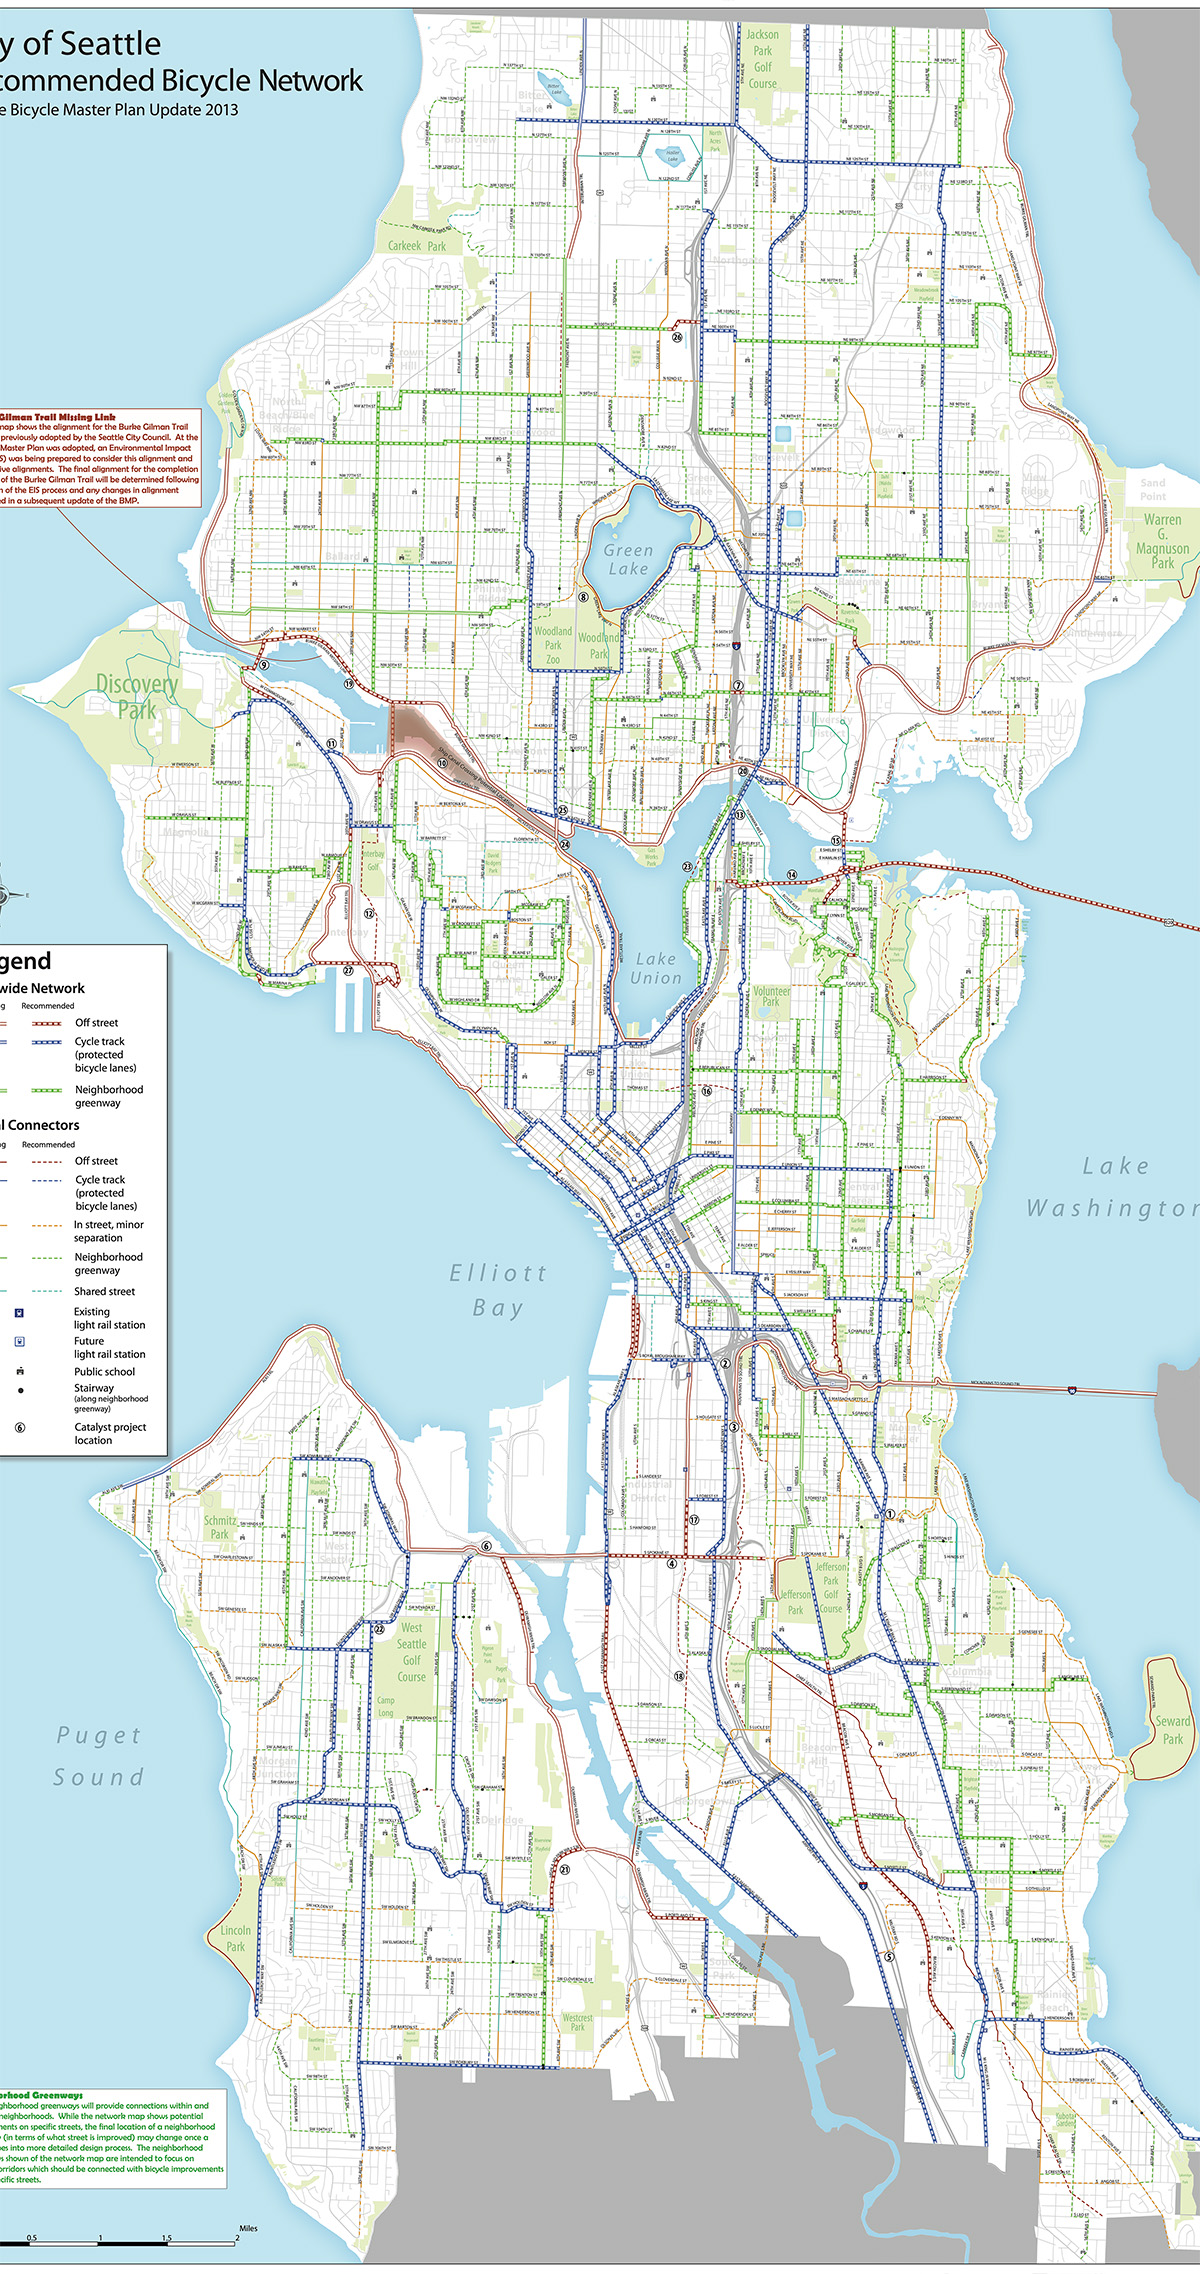 The 2014 Bicycle Master Plan Recommended Bicycle Network.